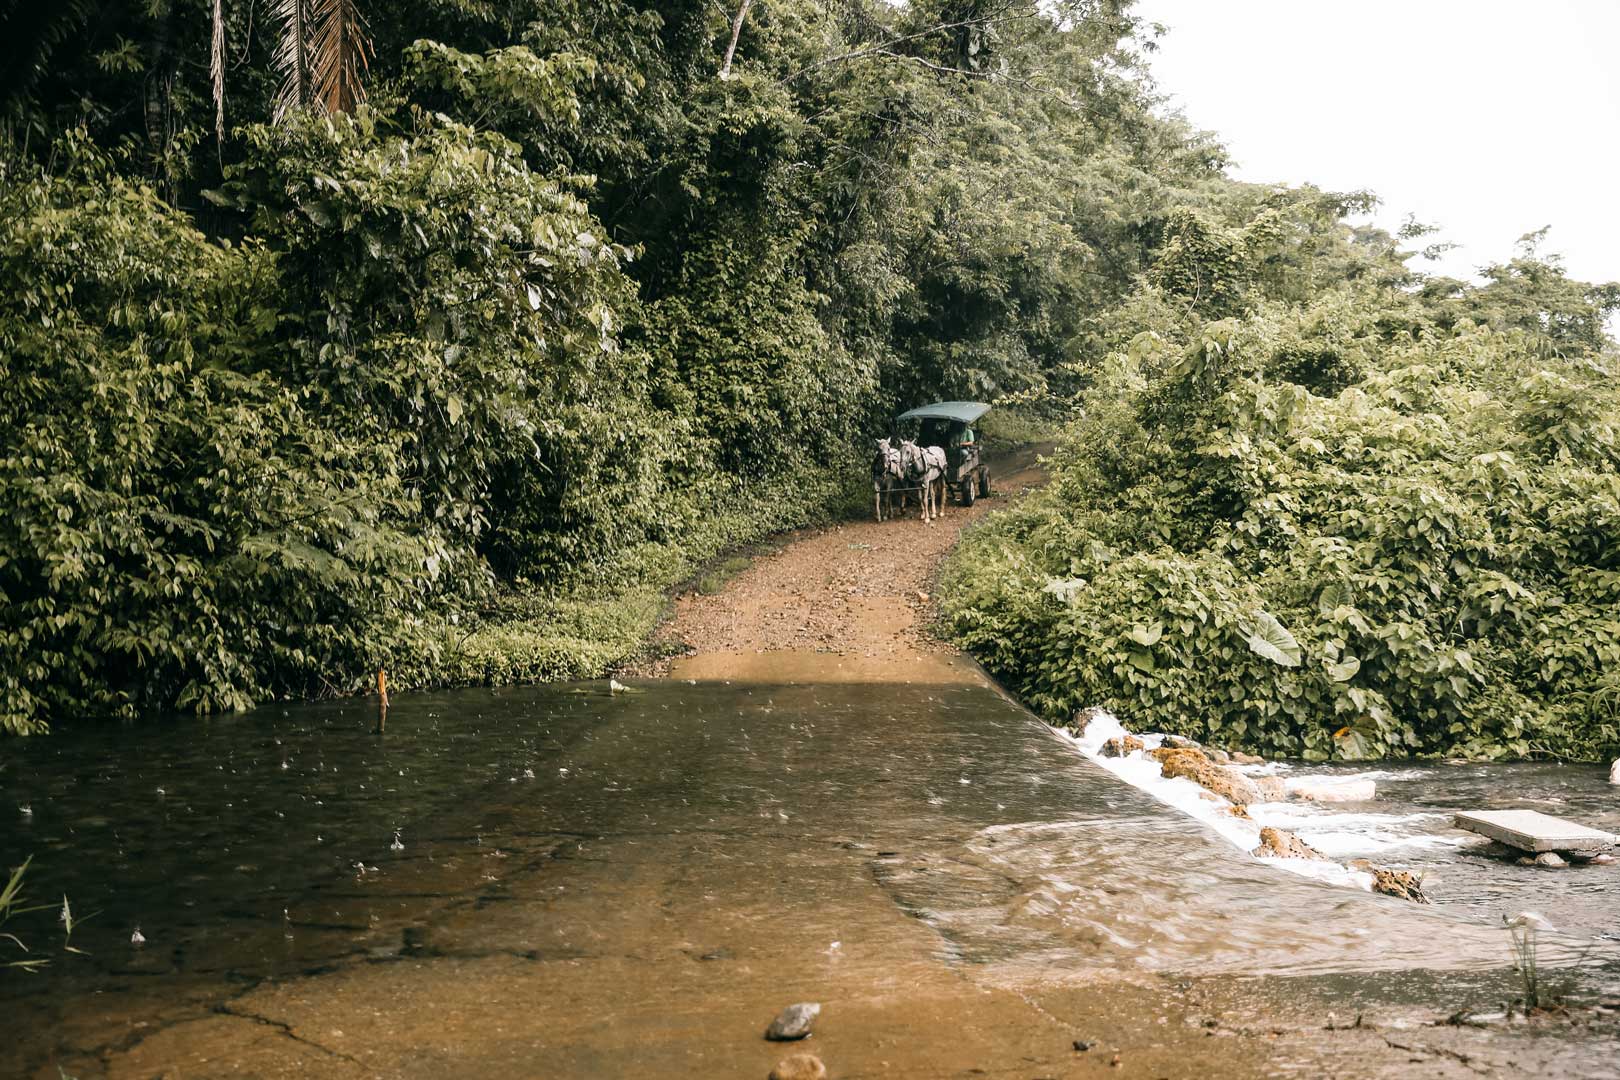 A horse and carriage approaching a creek crossing during the Horse Buggy Tour at The Rainforest Lodge at Sleeping Giant Resort